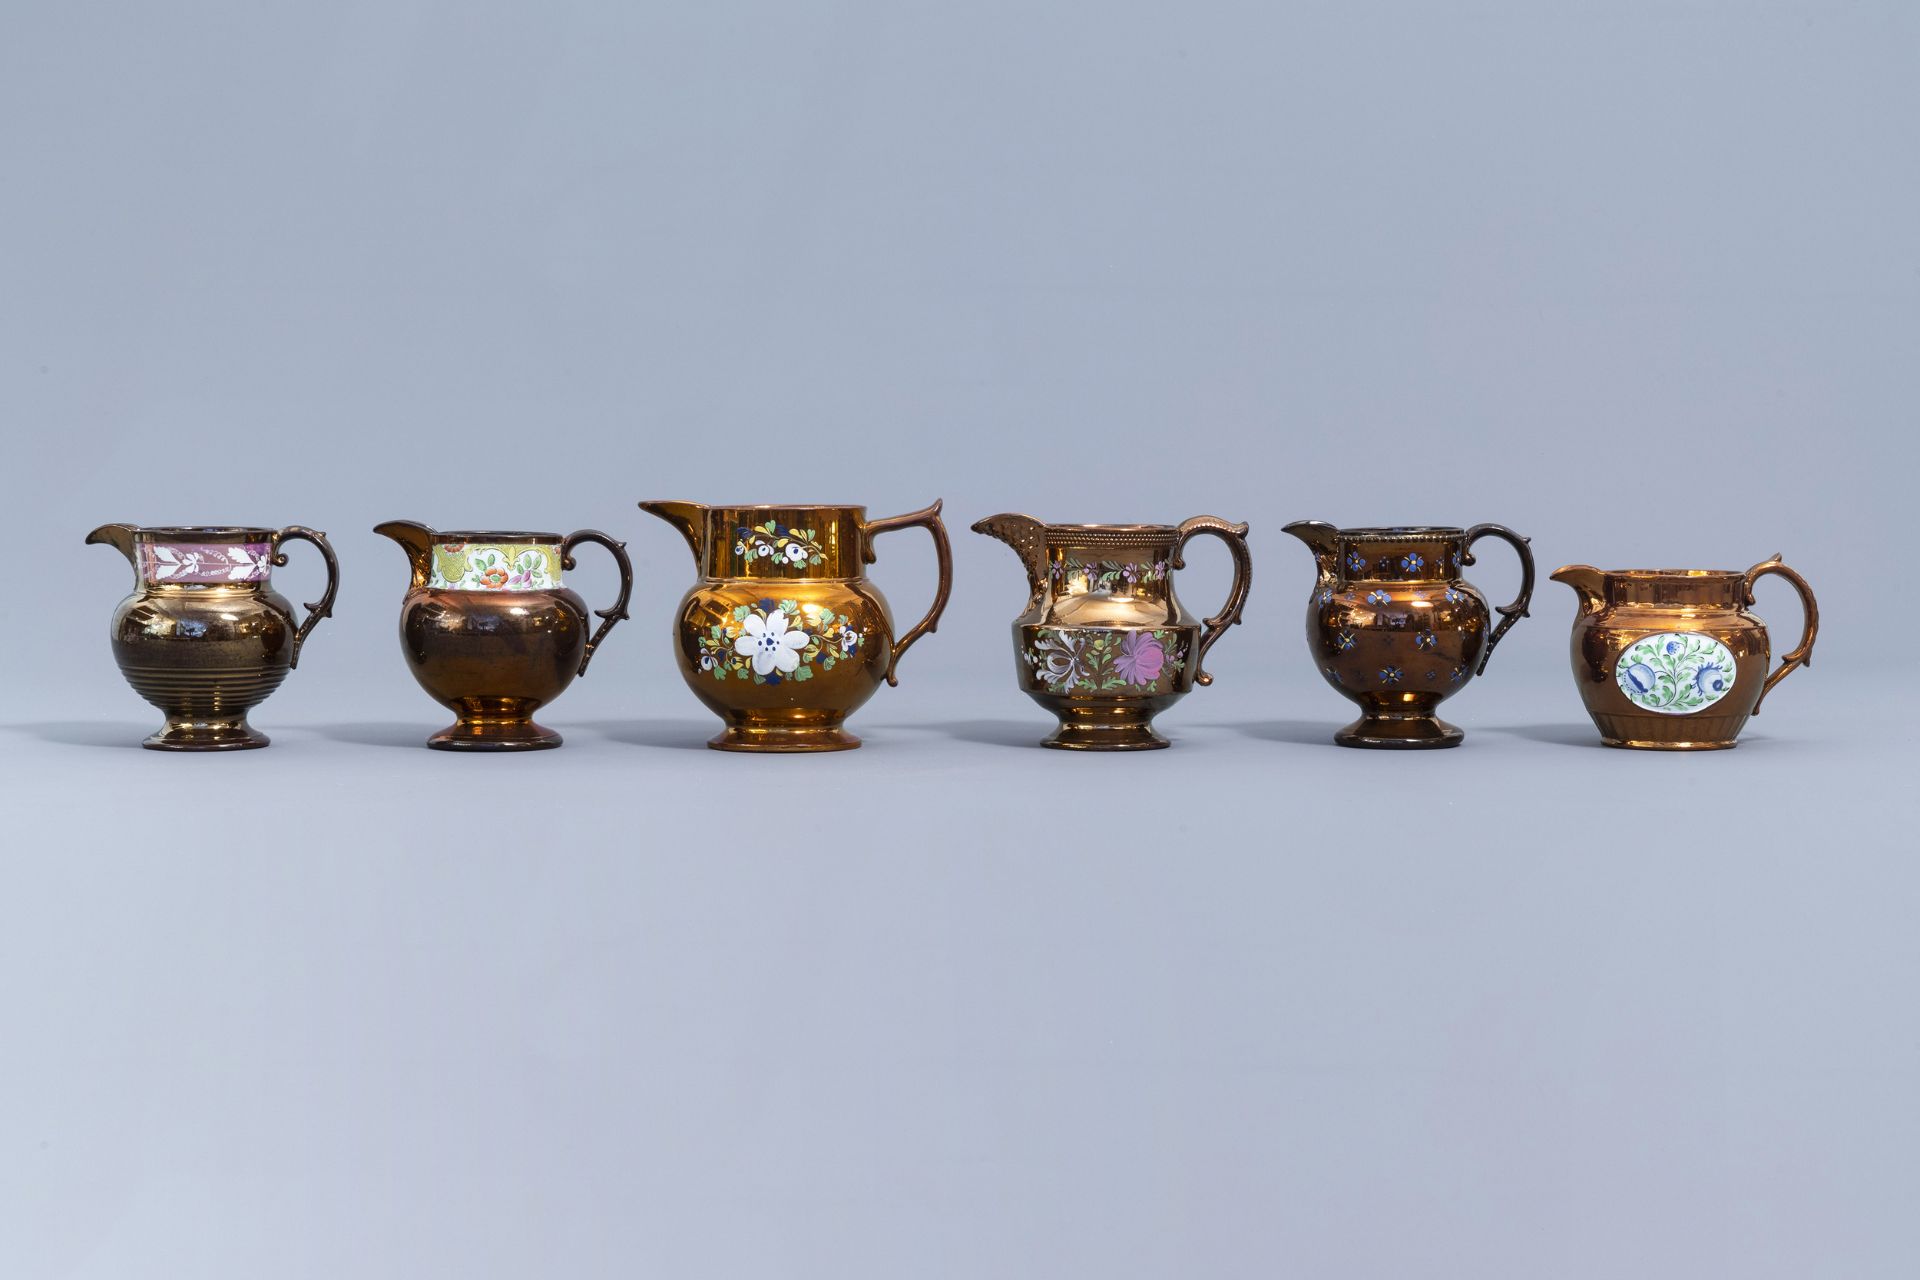 A varied collection of English lustreware items with polychrome floral design, 19th C. - Image 43 of 50